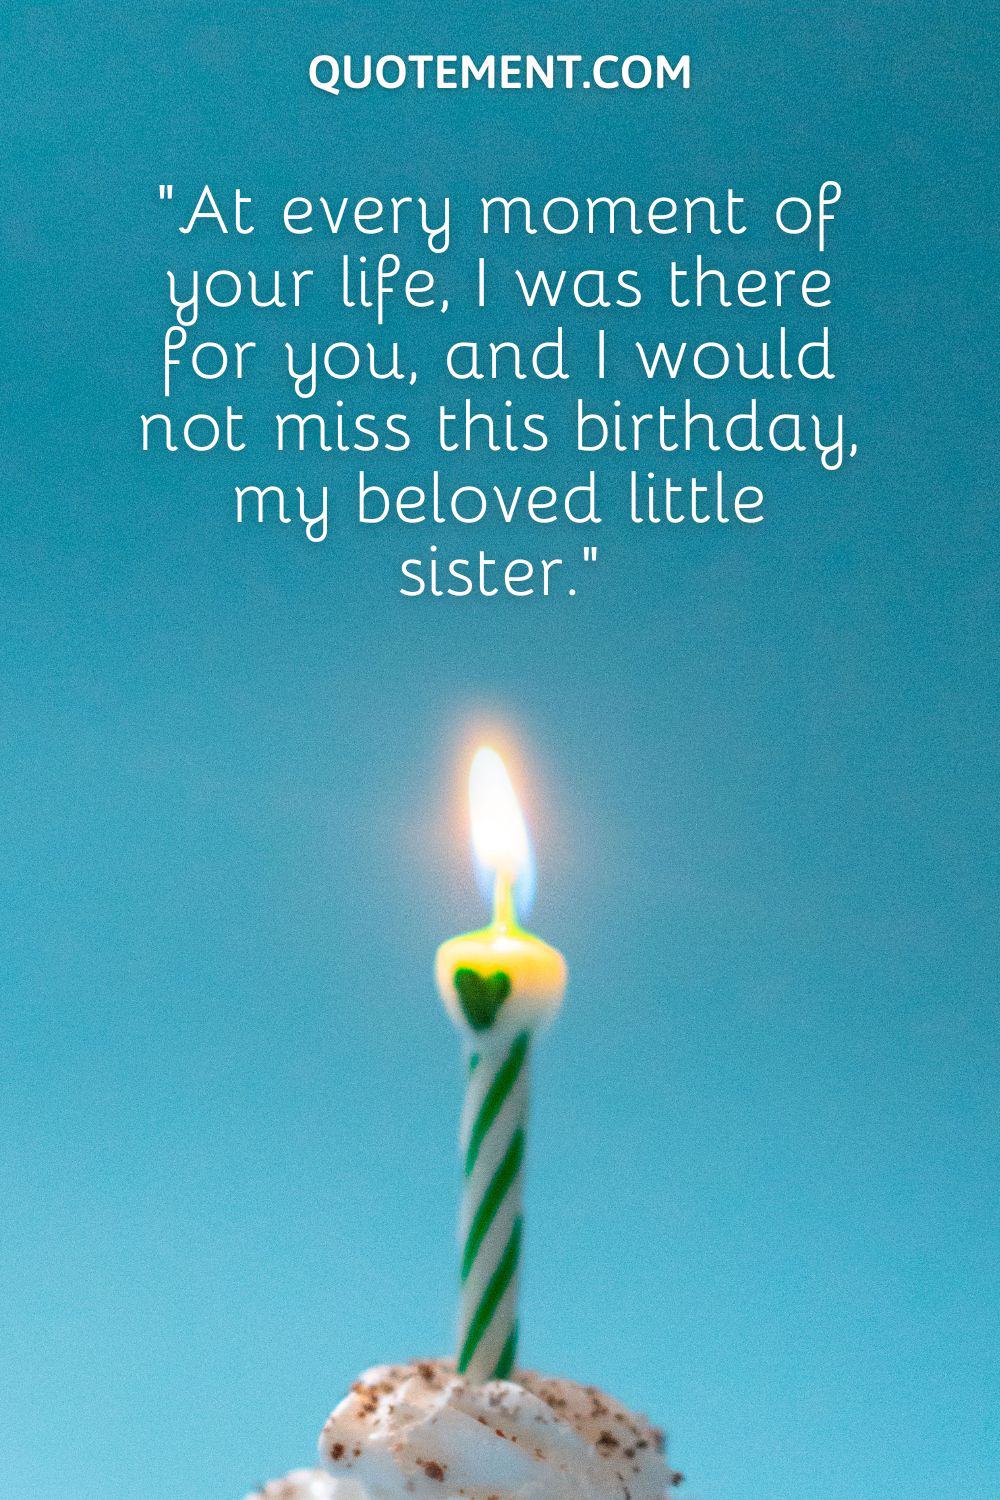 “At every moment of your life, I was there for you, and I would not miss this birthday, my beloved little sister.”